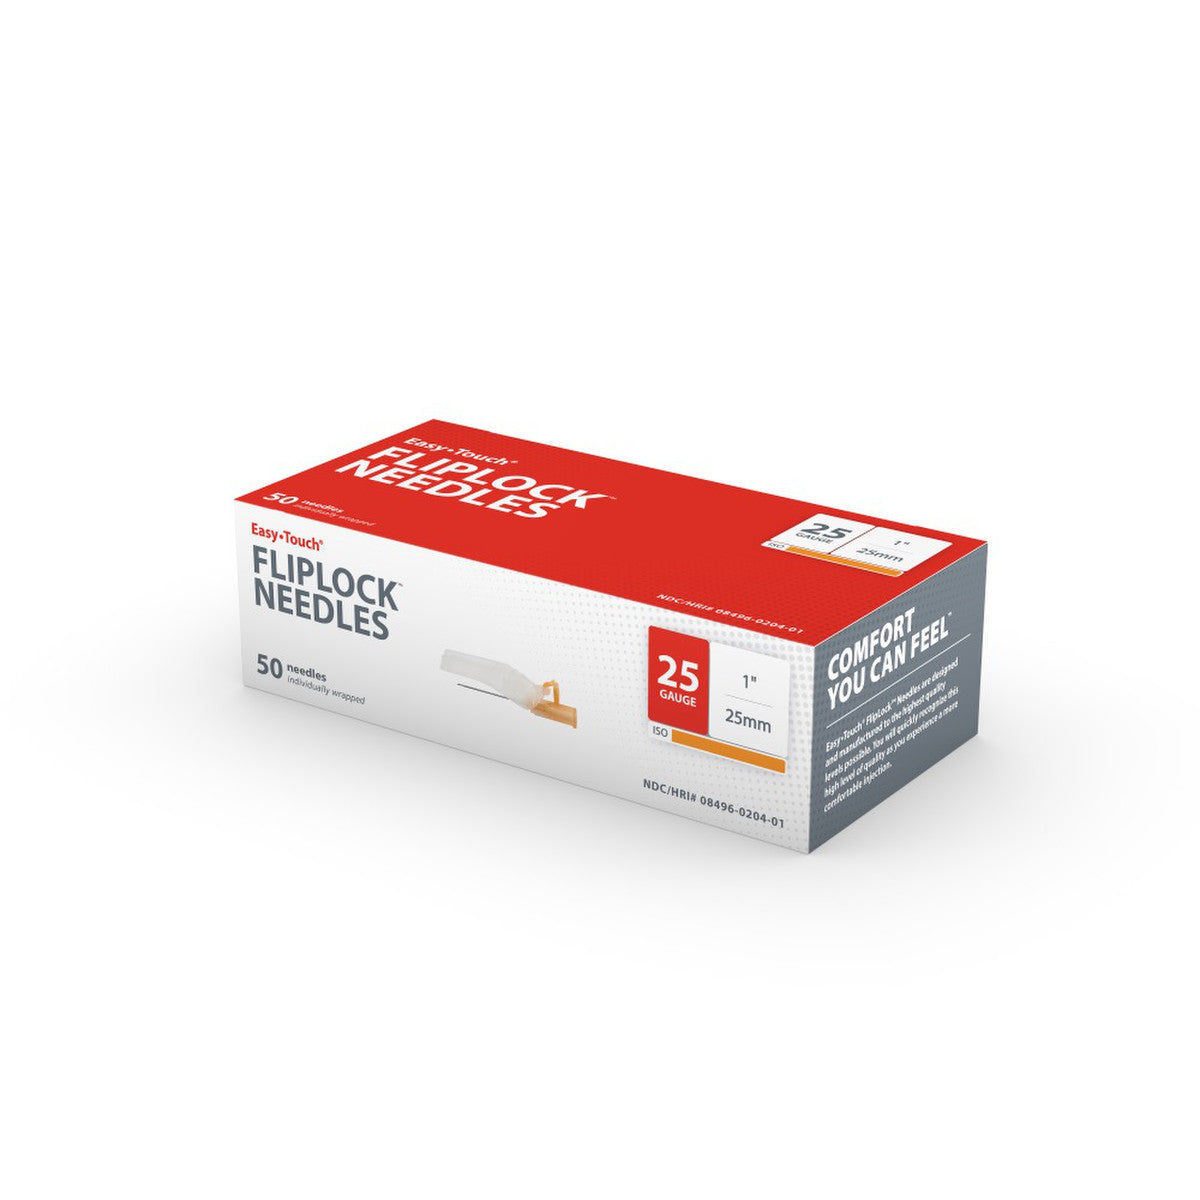 Easy Touch FlipLock (Needle Only), 25G 1 Inch 25mm, 812501